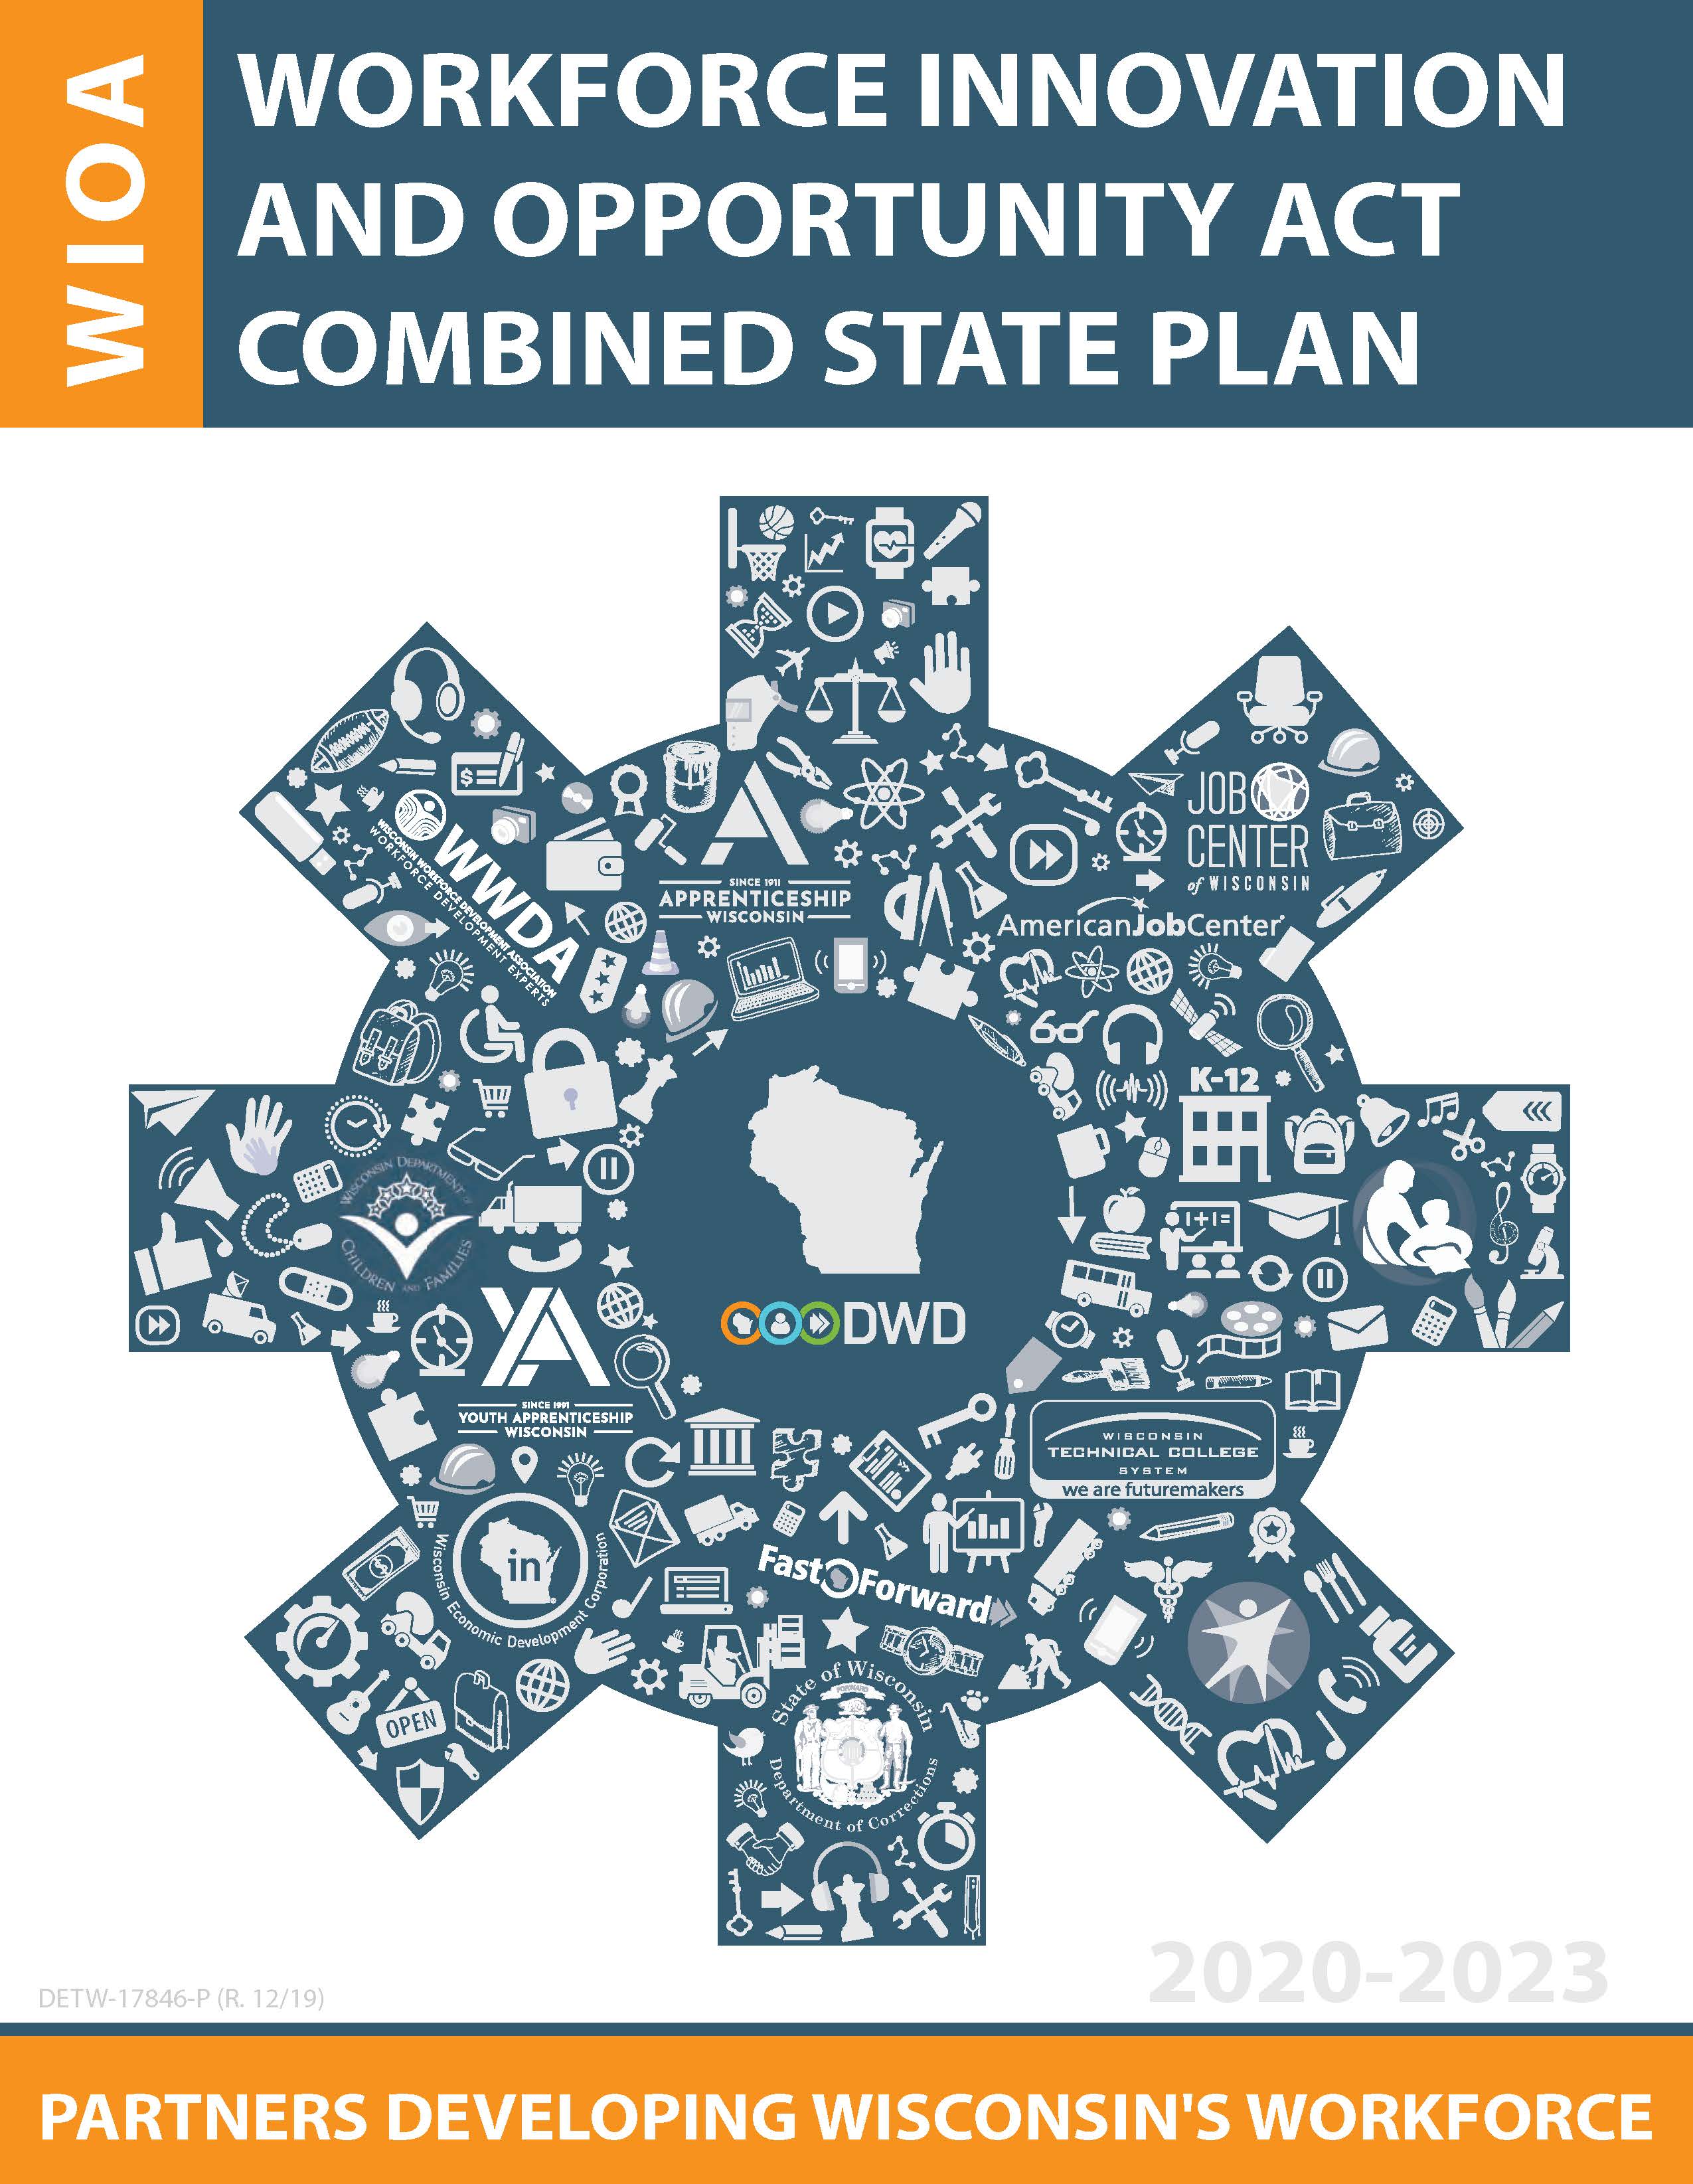 The cover photo and link to the WIOA State Plan